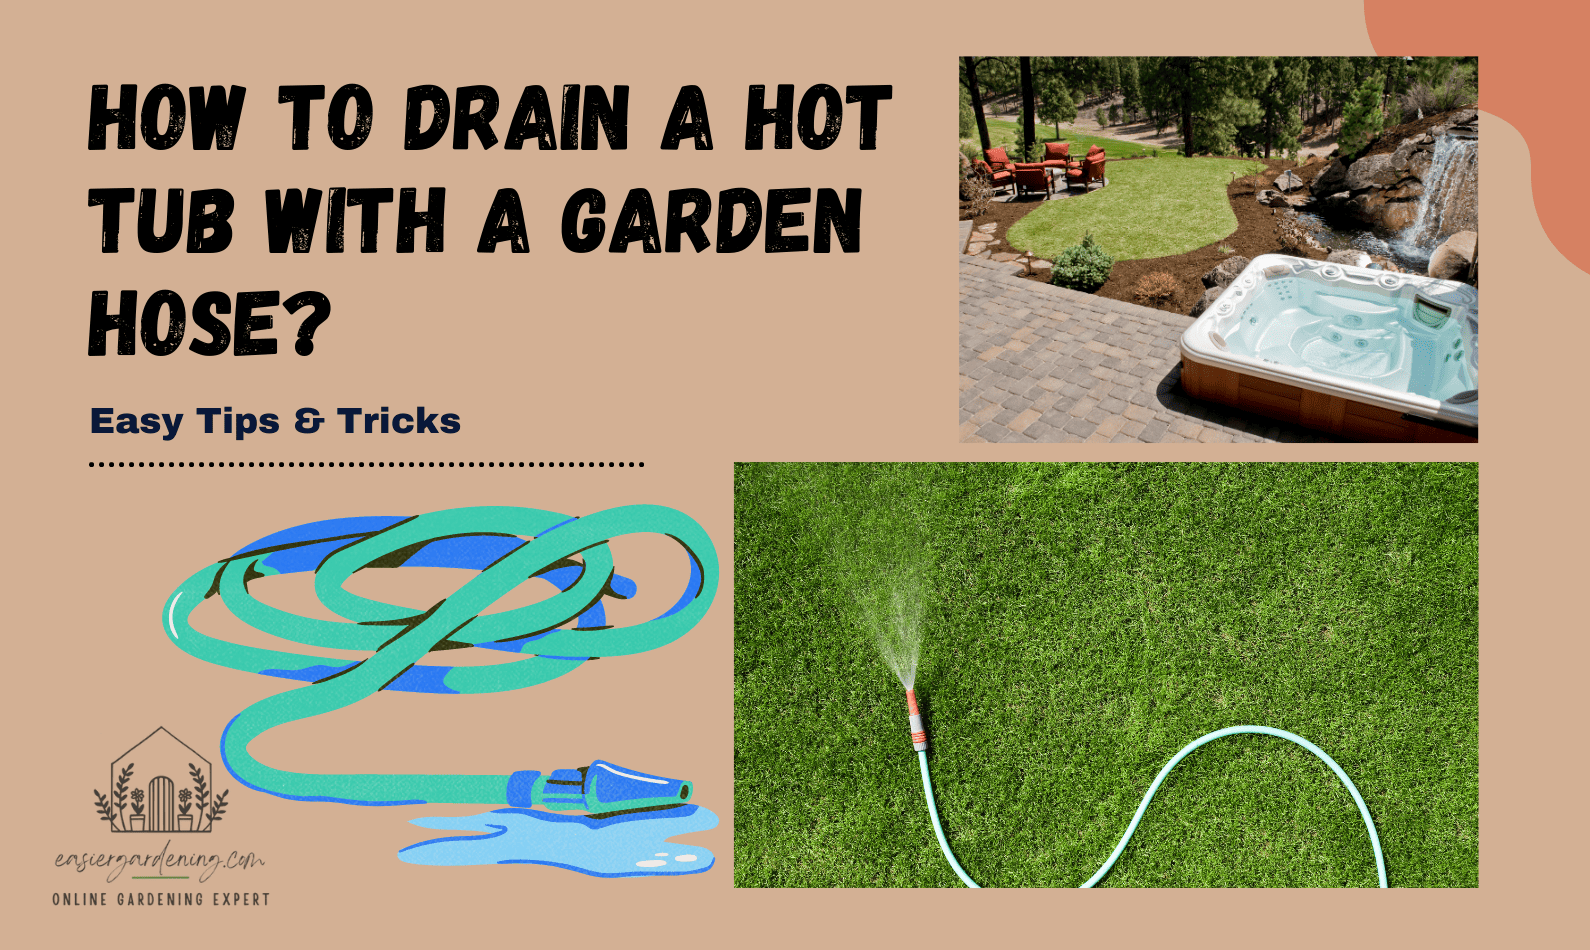 How to Drain a Hot Tub with a Garden Hose?